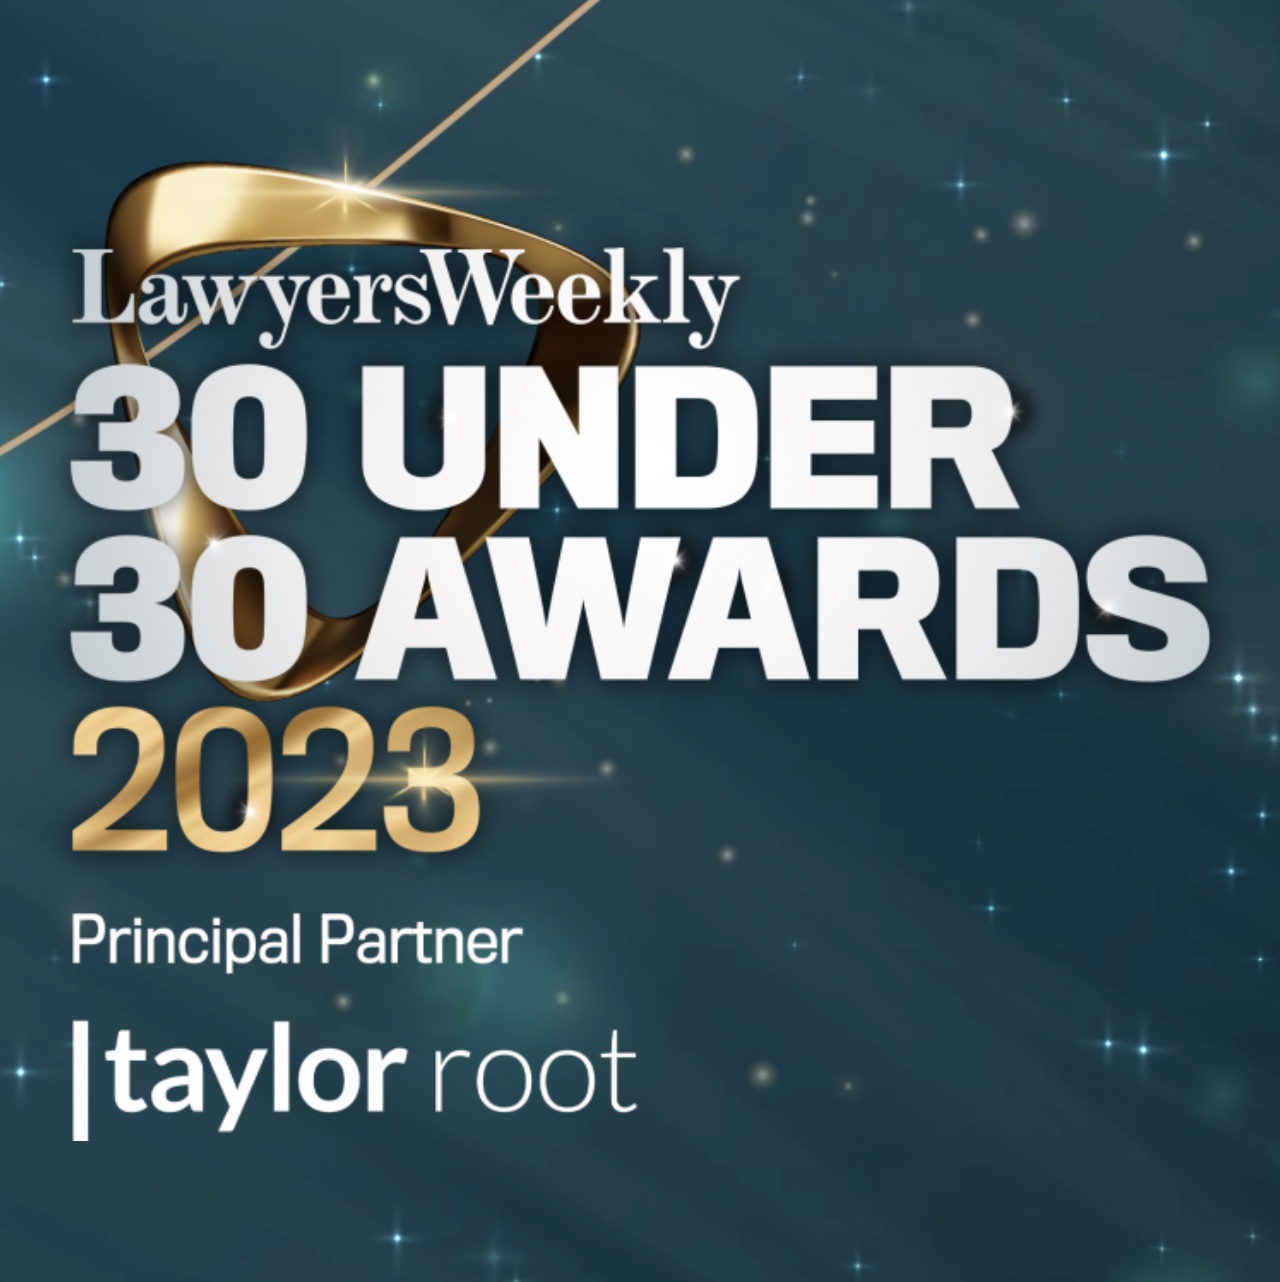 Lawyers Weekly 30 Under 30